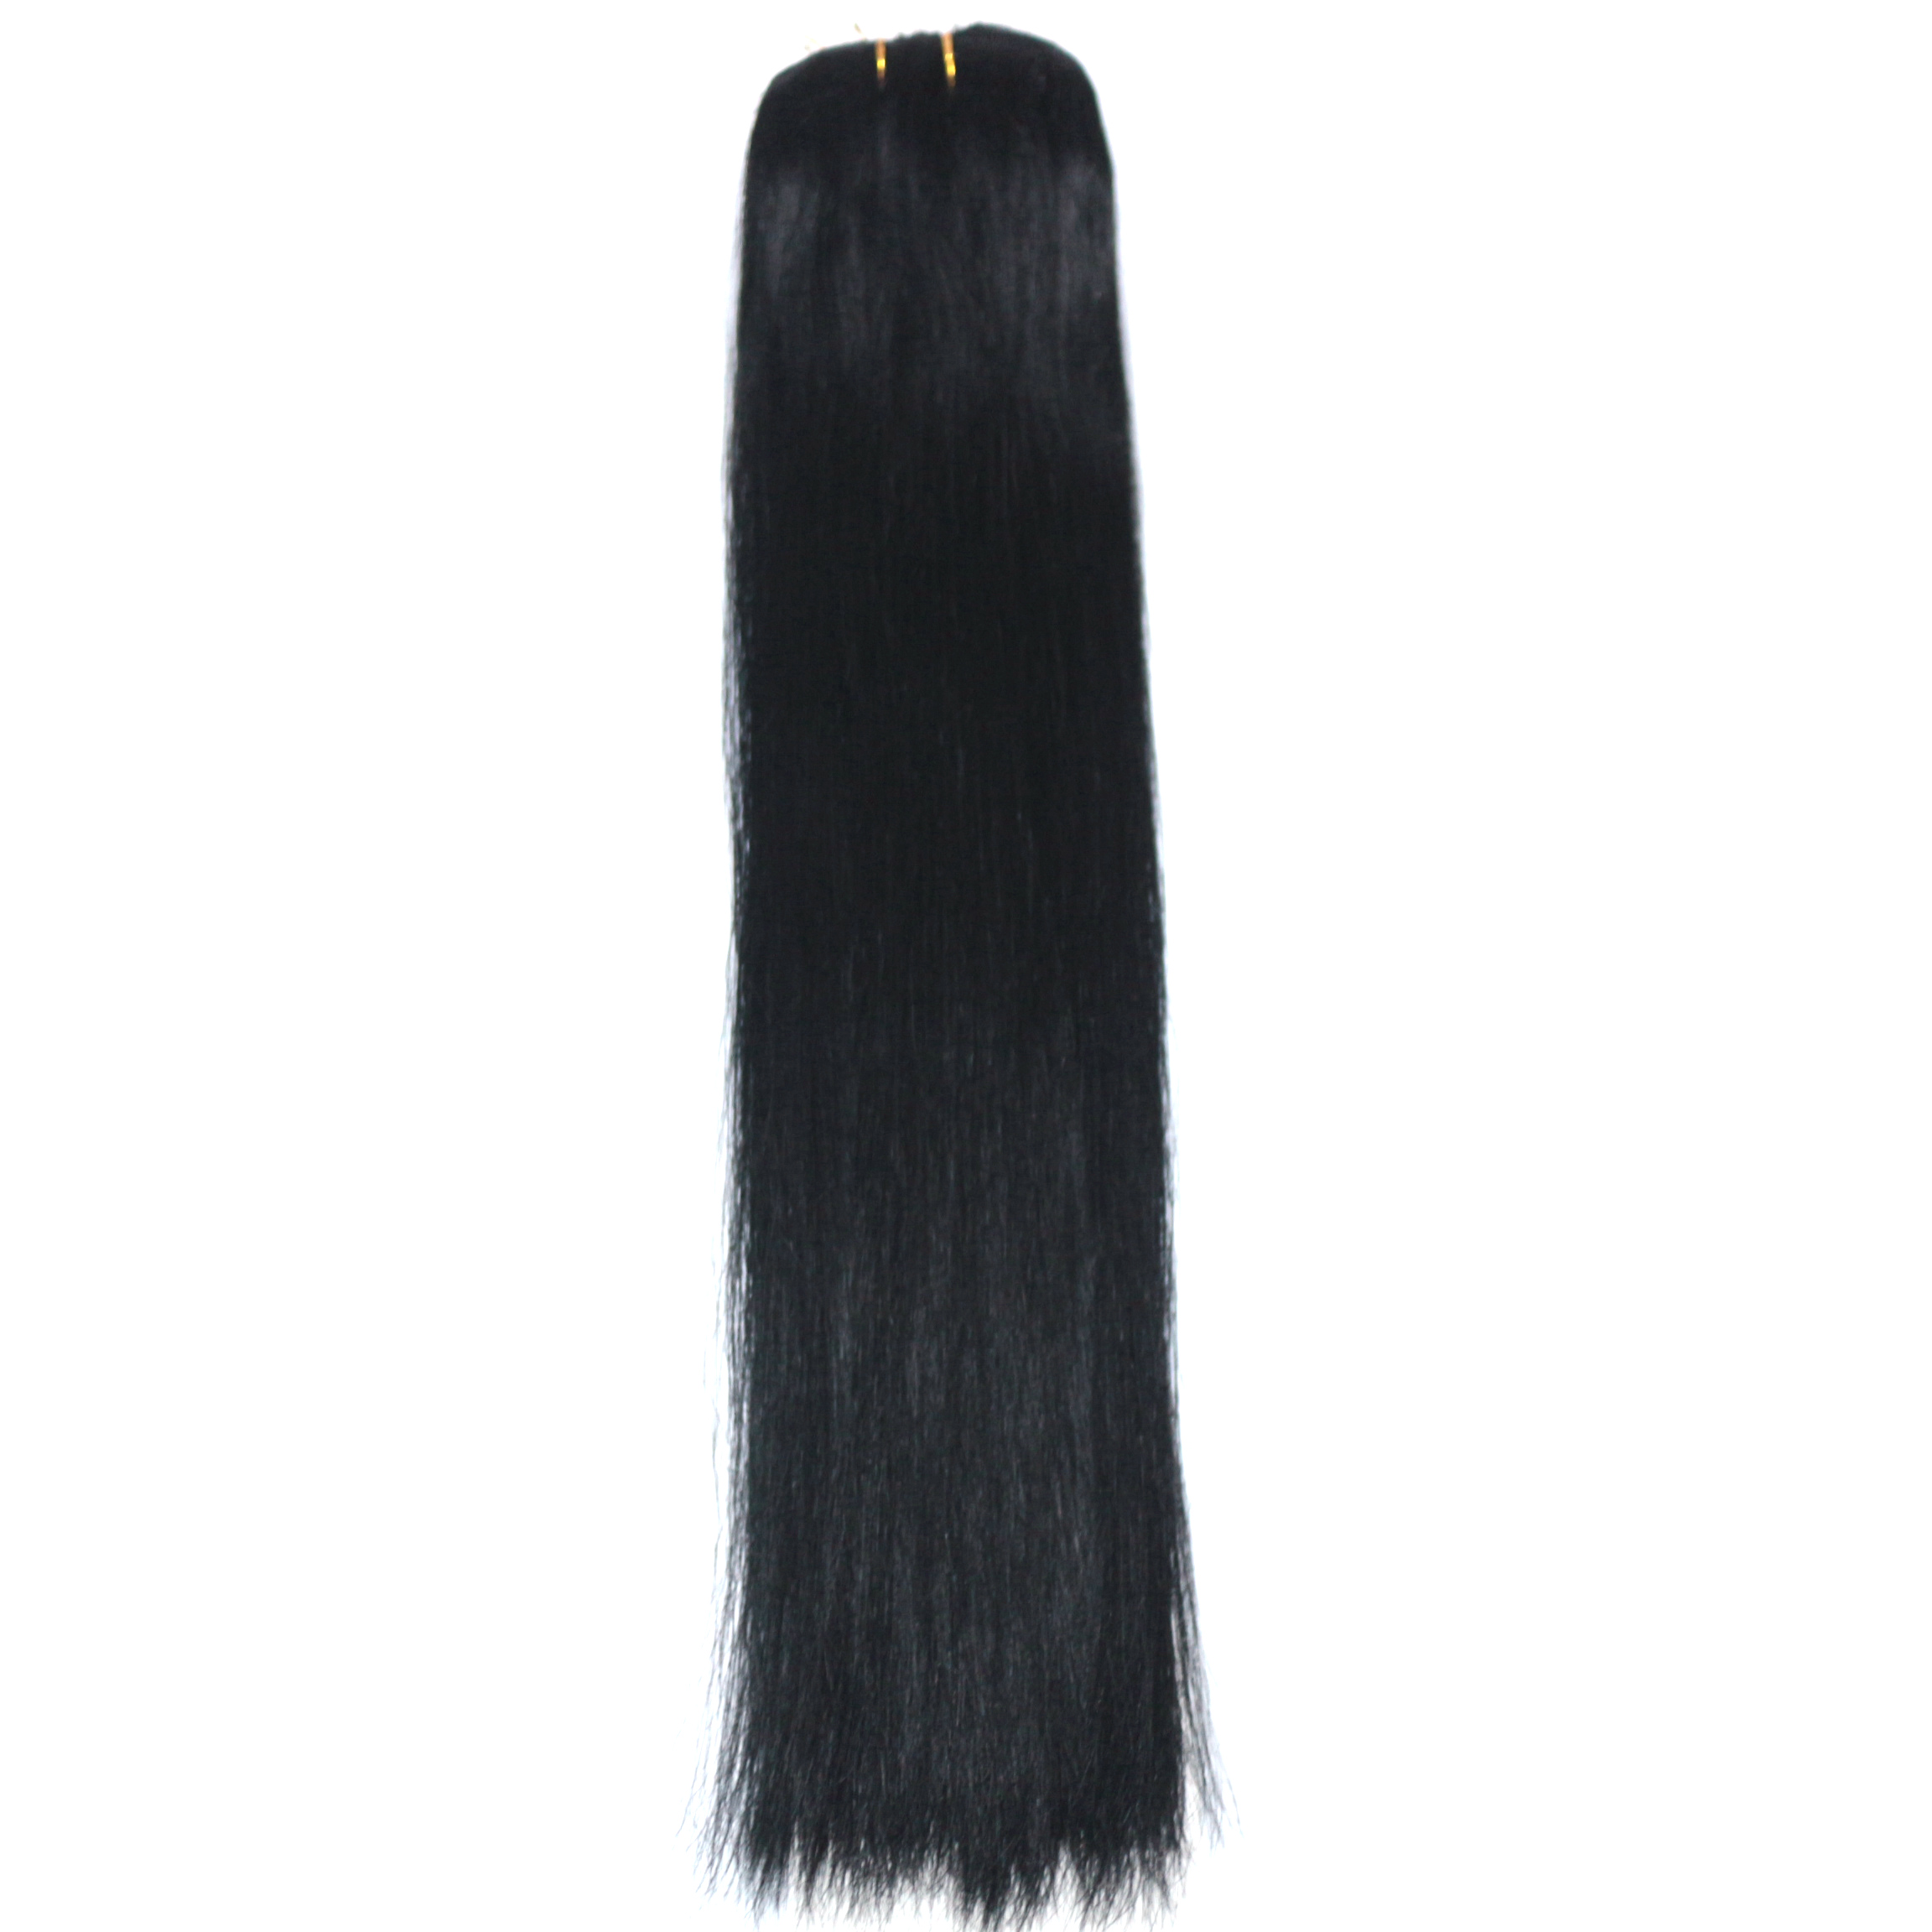 Clip in Human Hair Extensions 10pcs 22clips #1 (1)